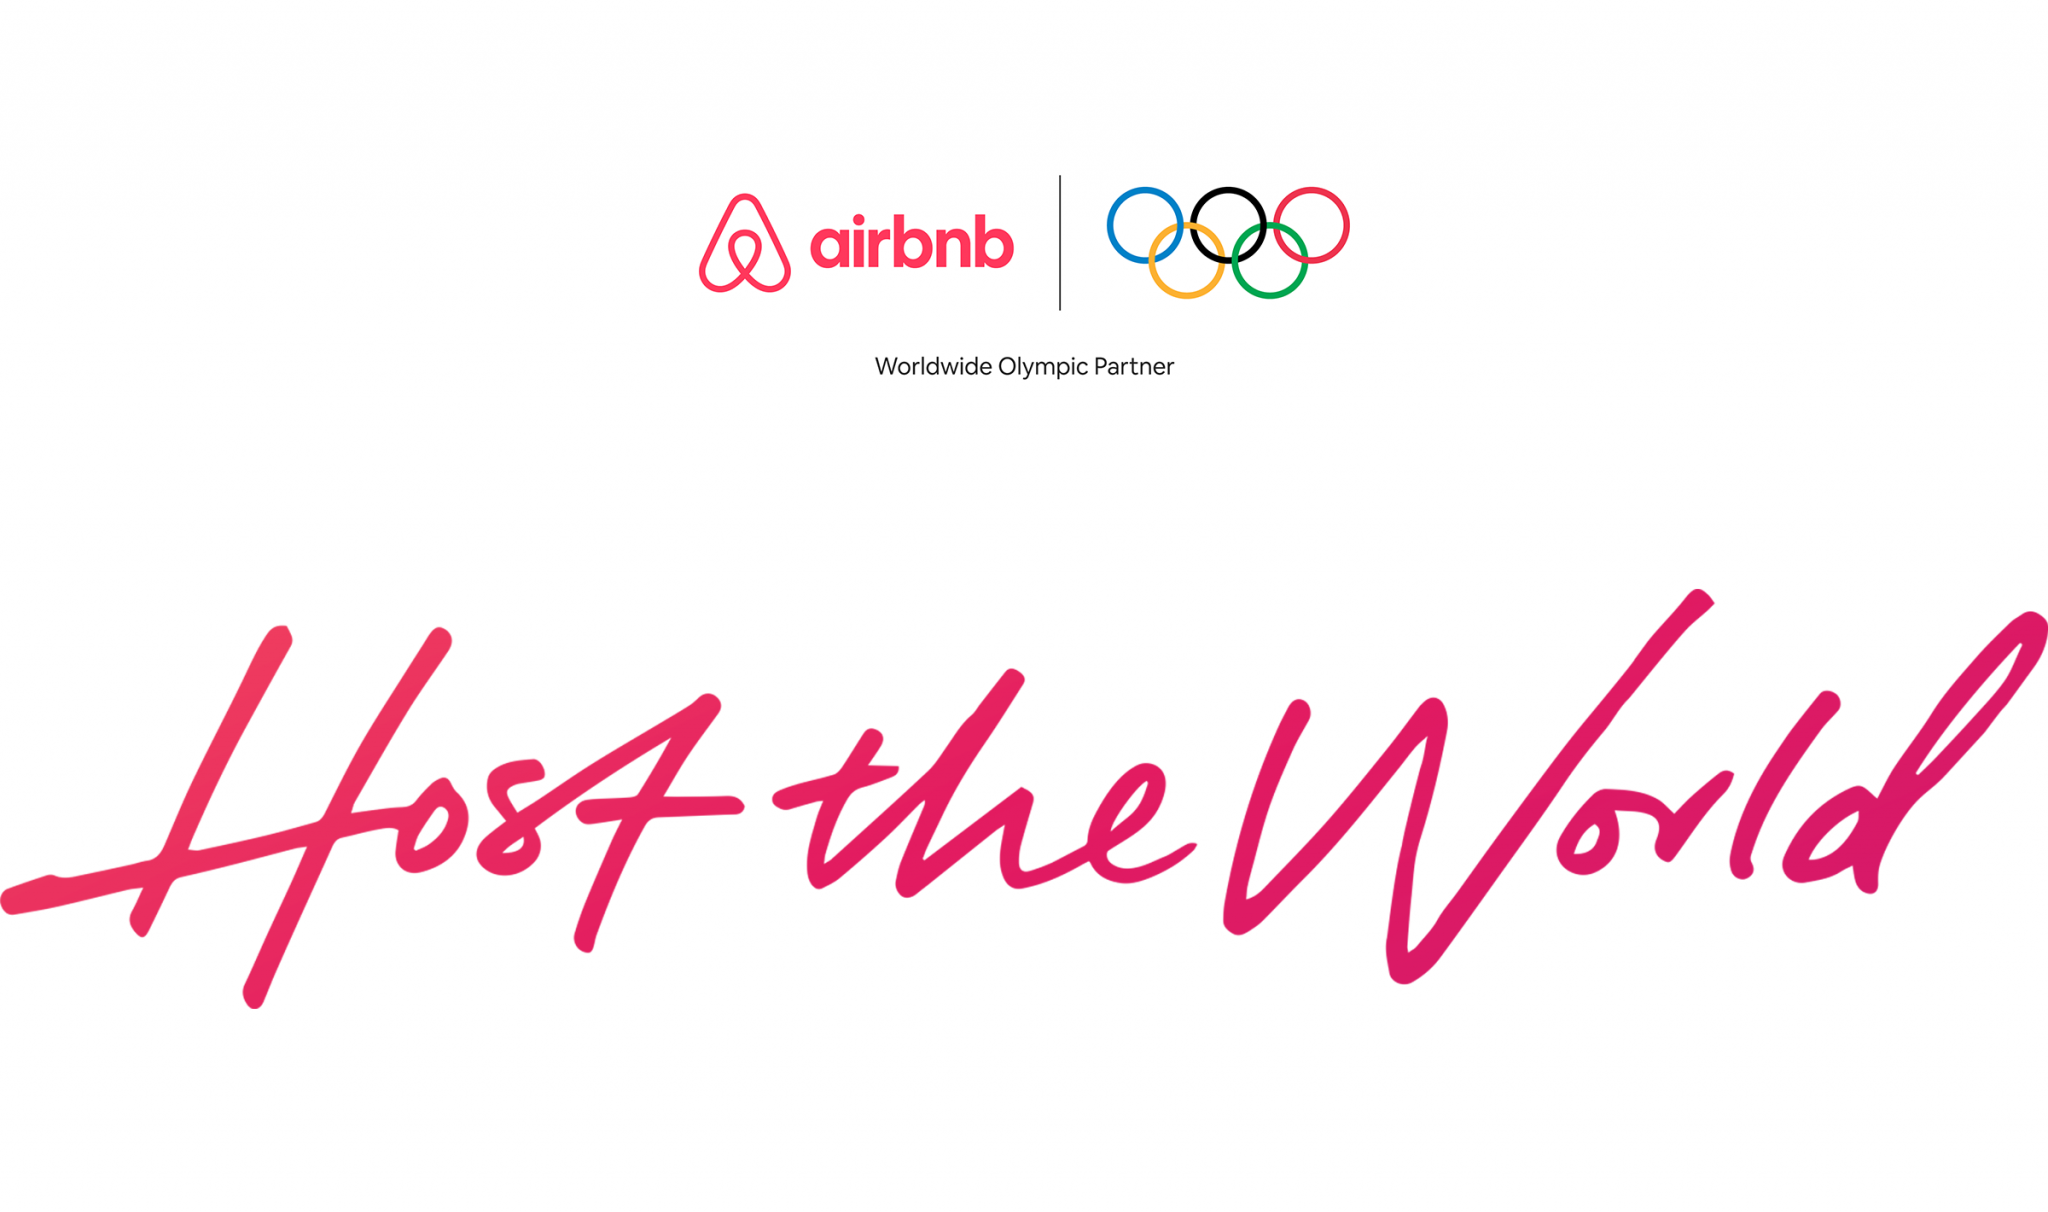 Airbnb becomes the 14th worldwide Olympic partner for Tokyo 2020 ©Airbnb